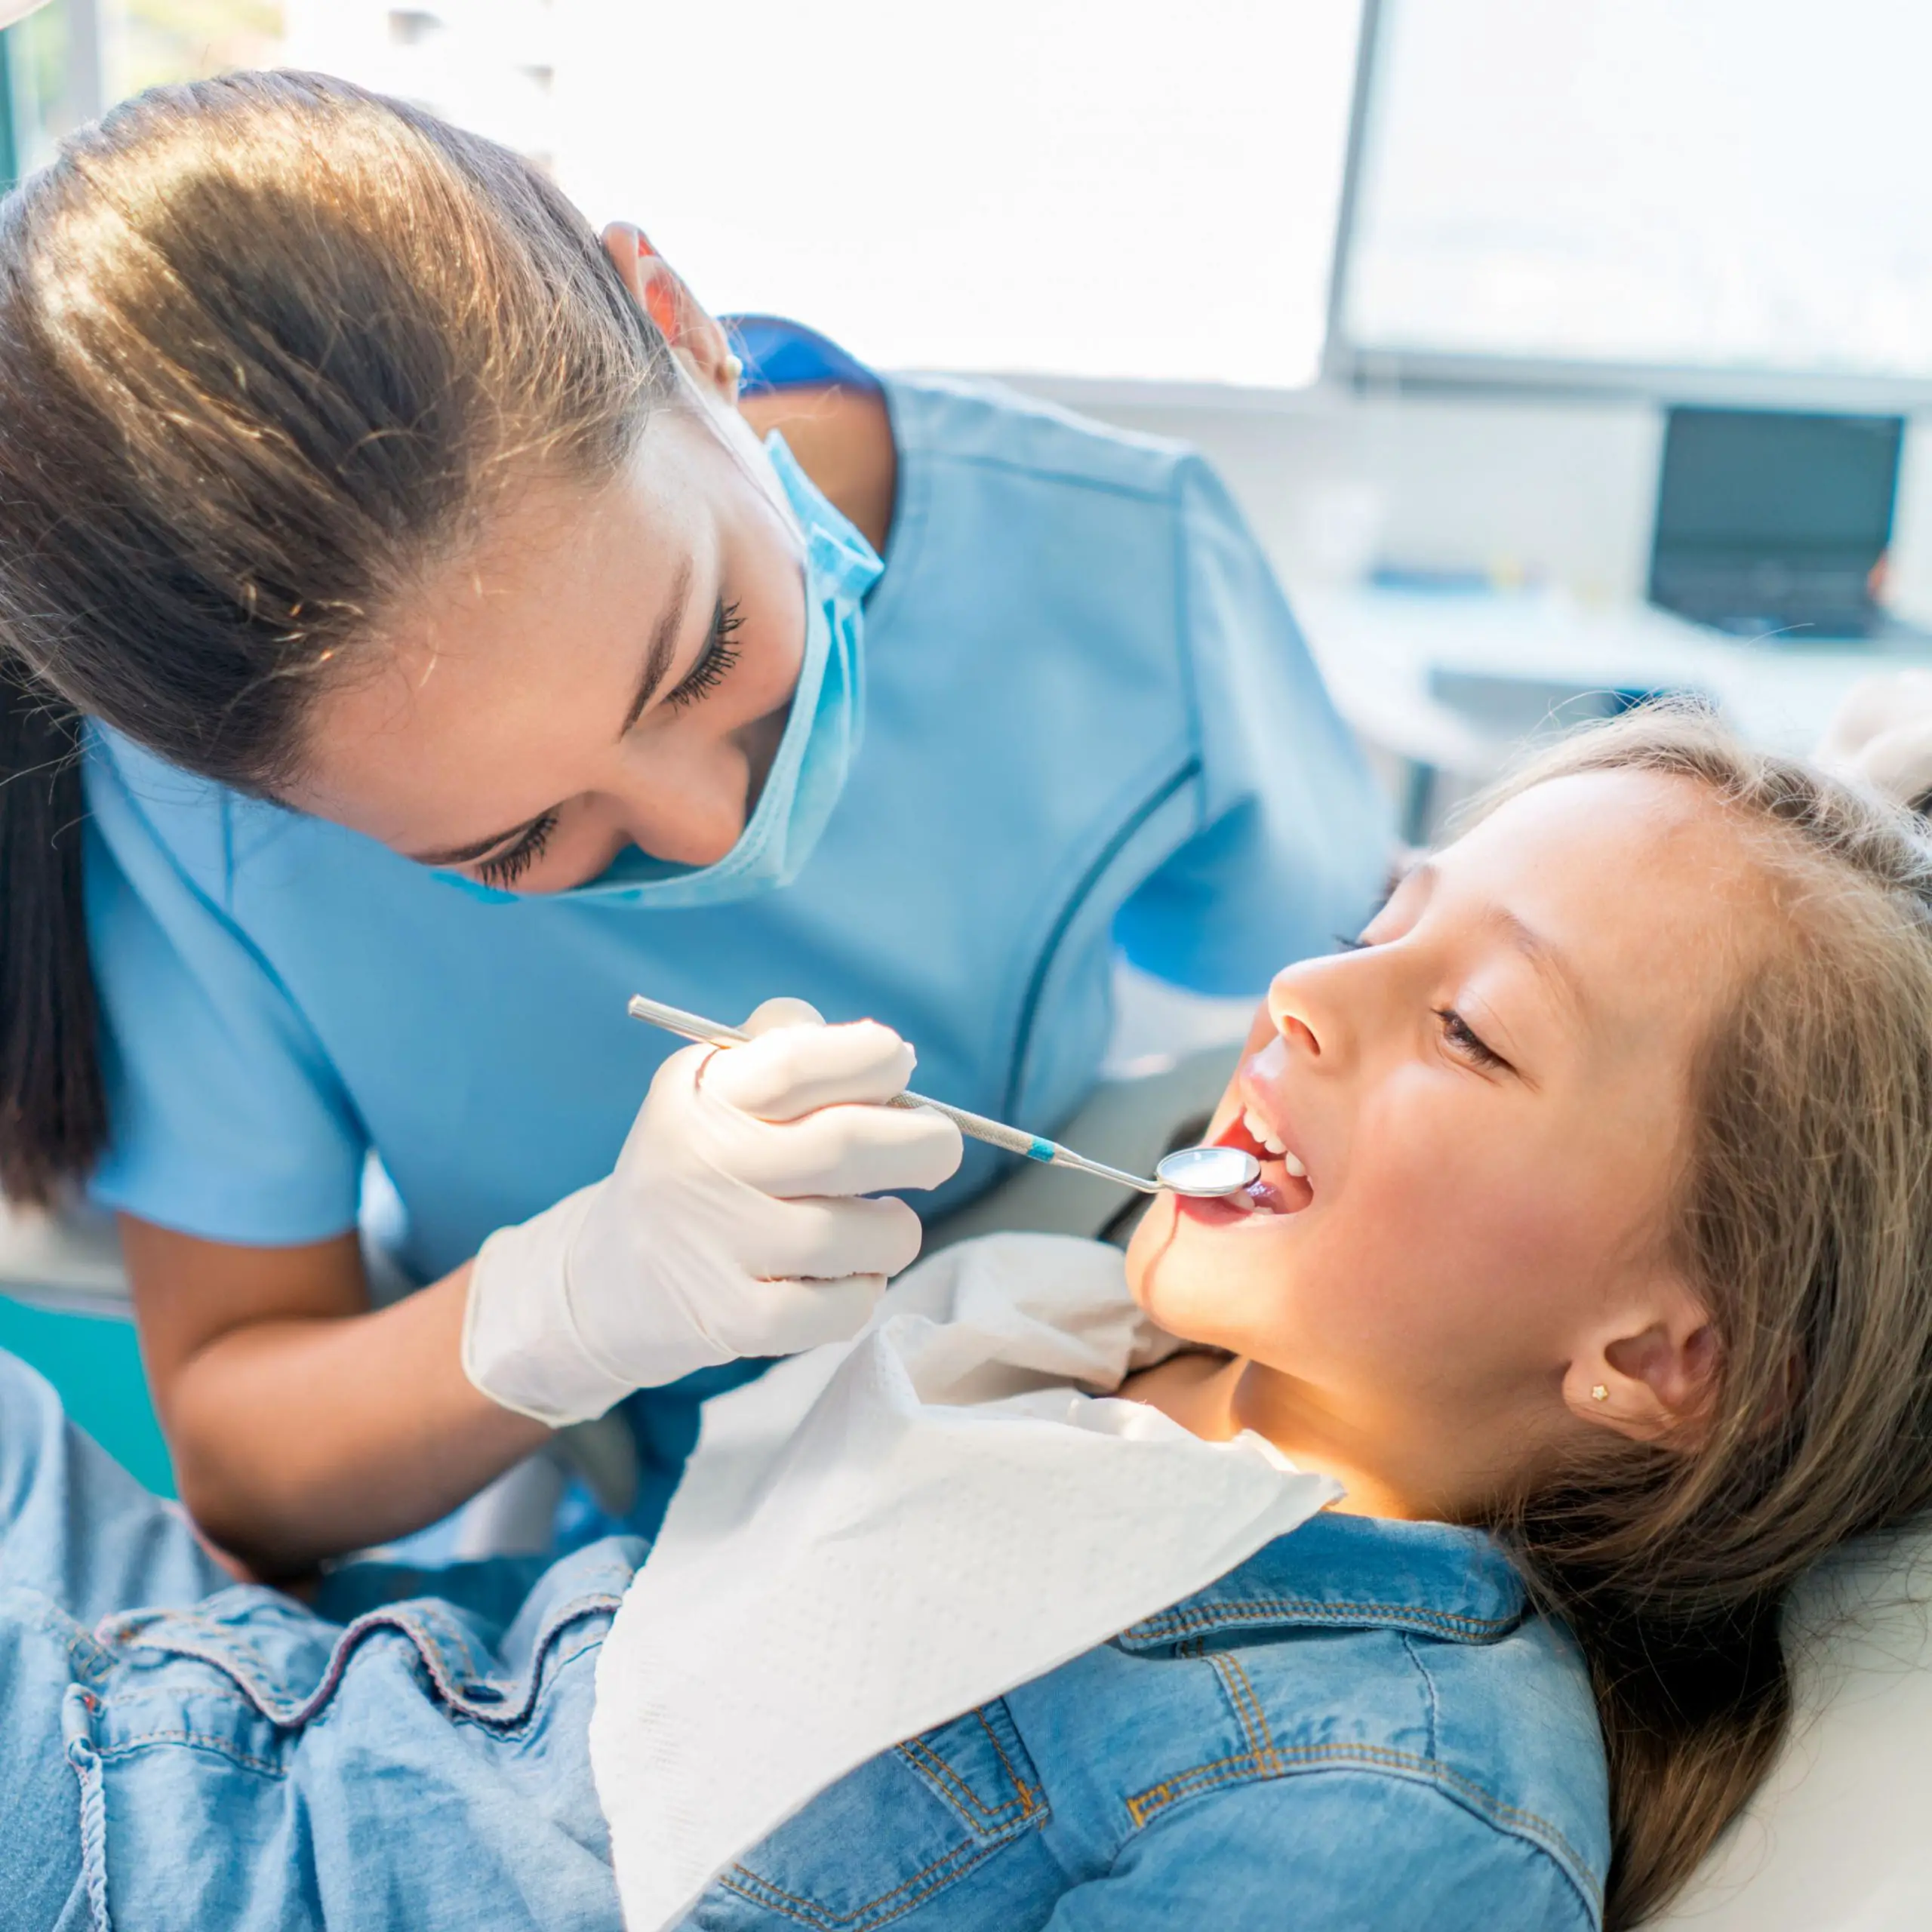 Accurately Evaluating Pediatric Dental Access for Medicaid